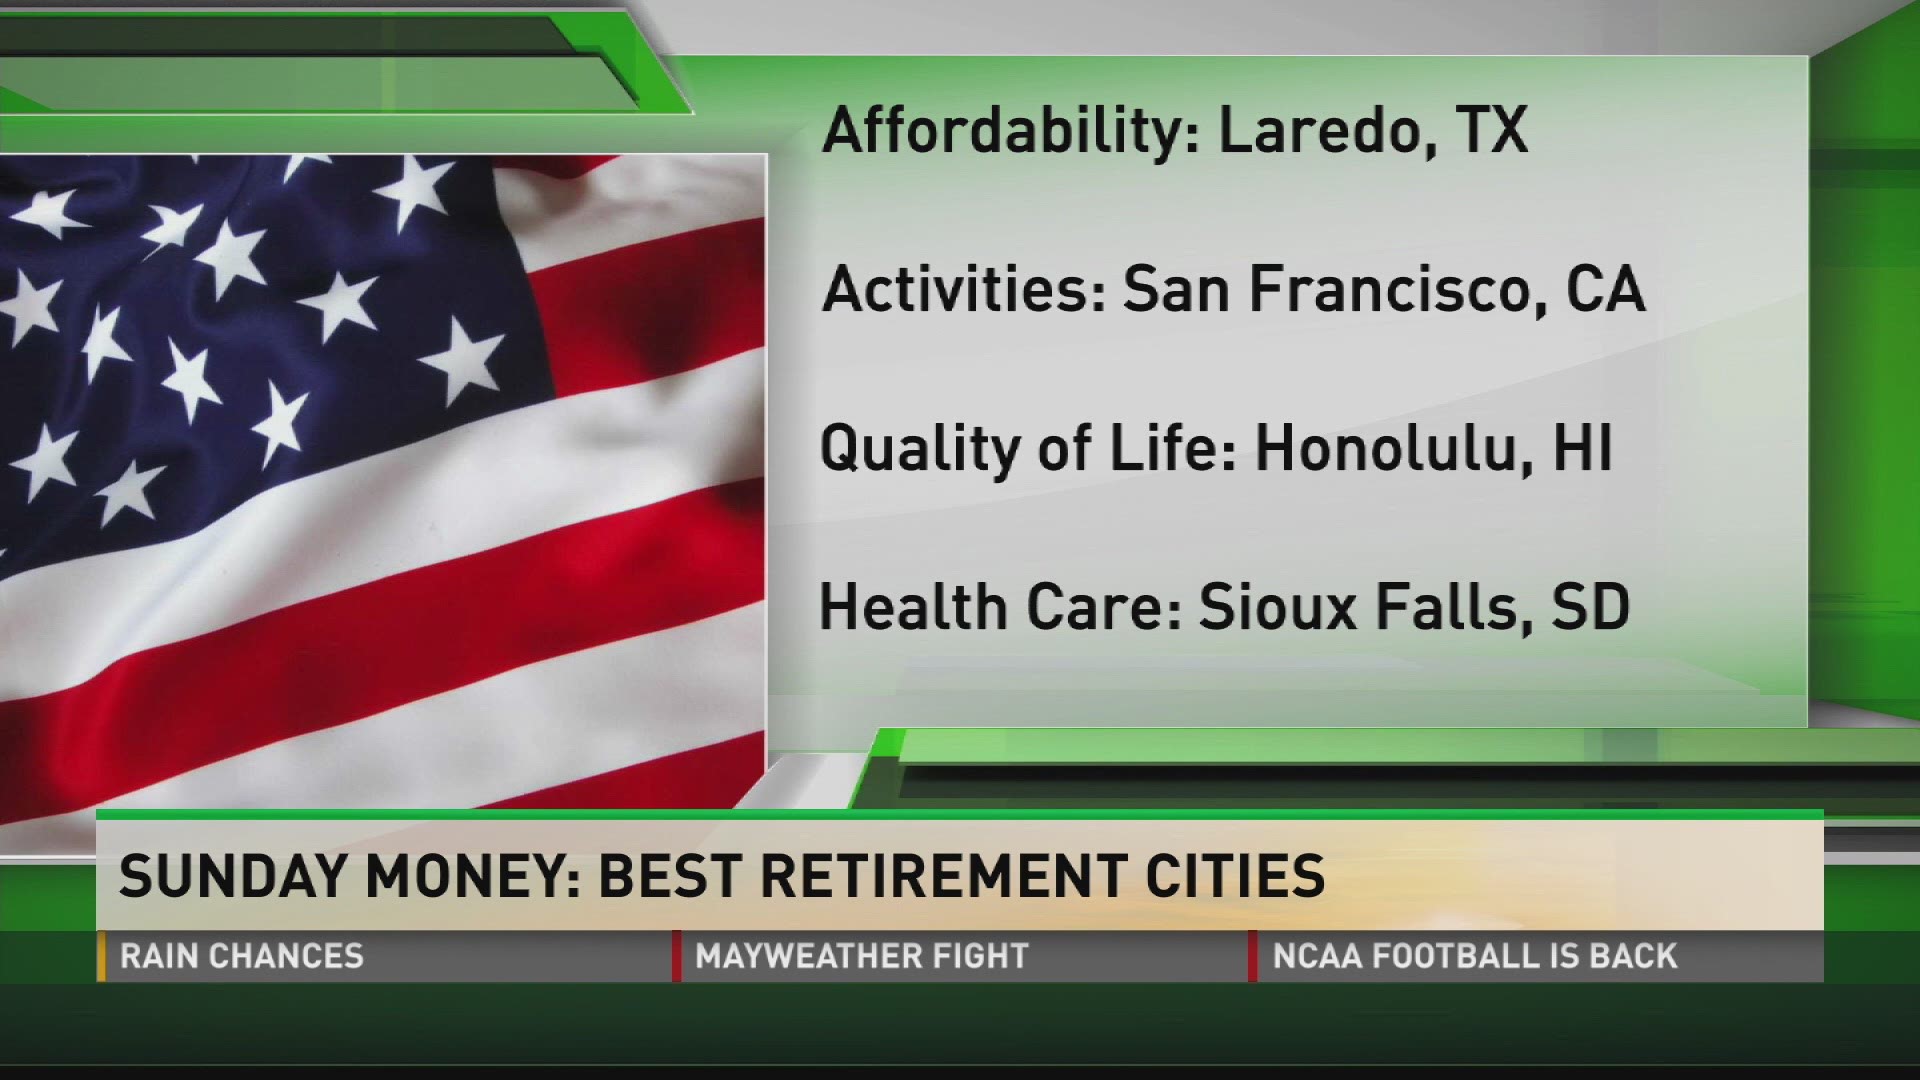 Paul Fain shares his tips for the best retirement cities